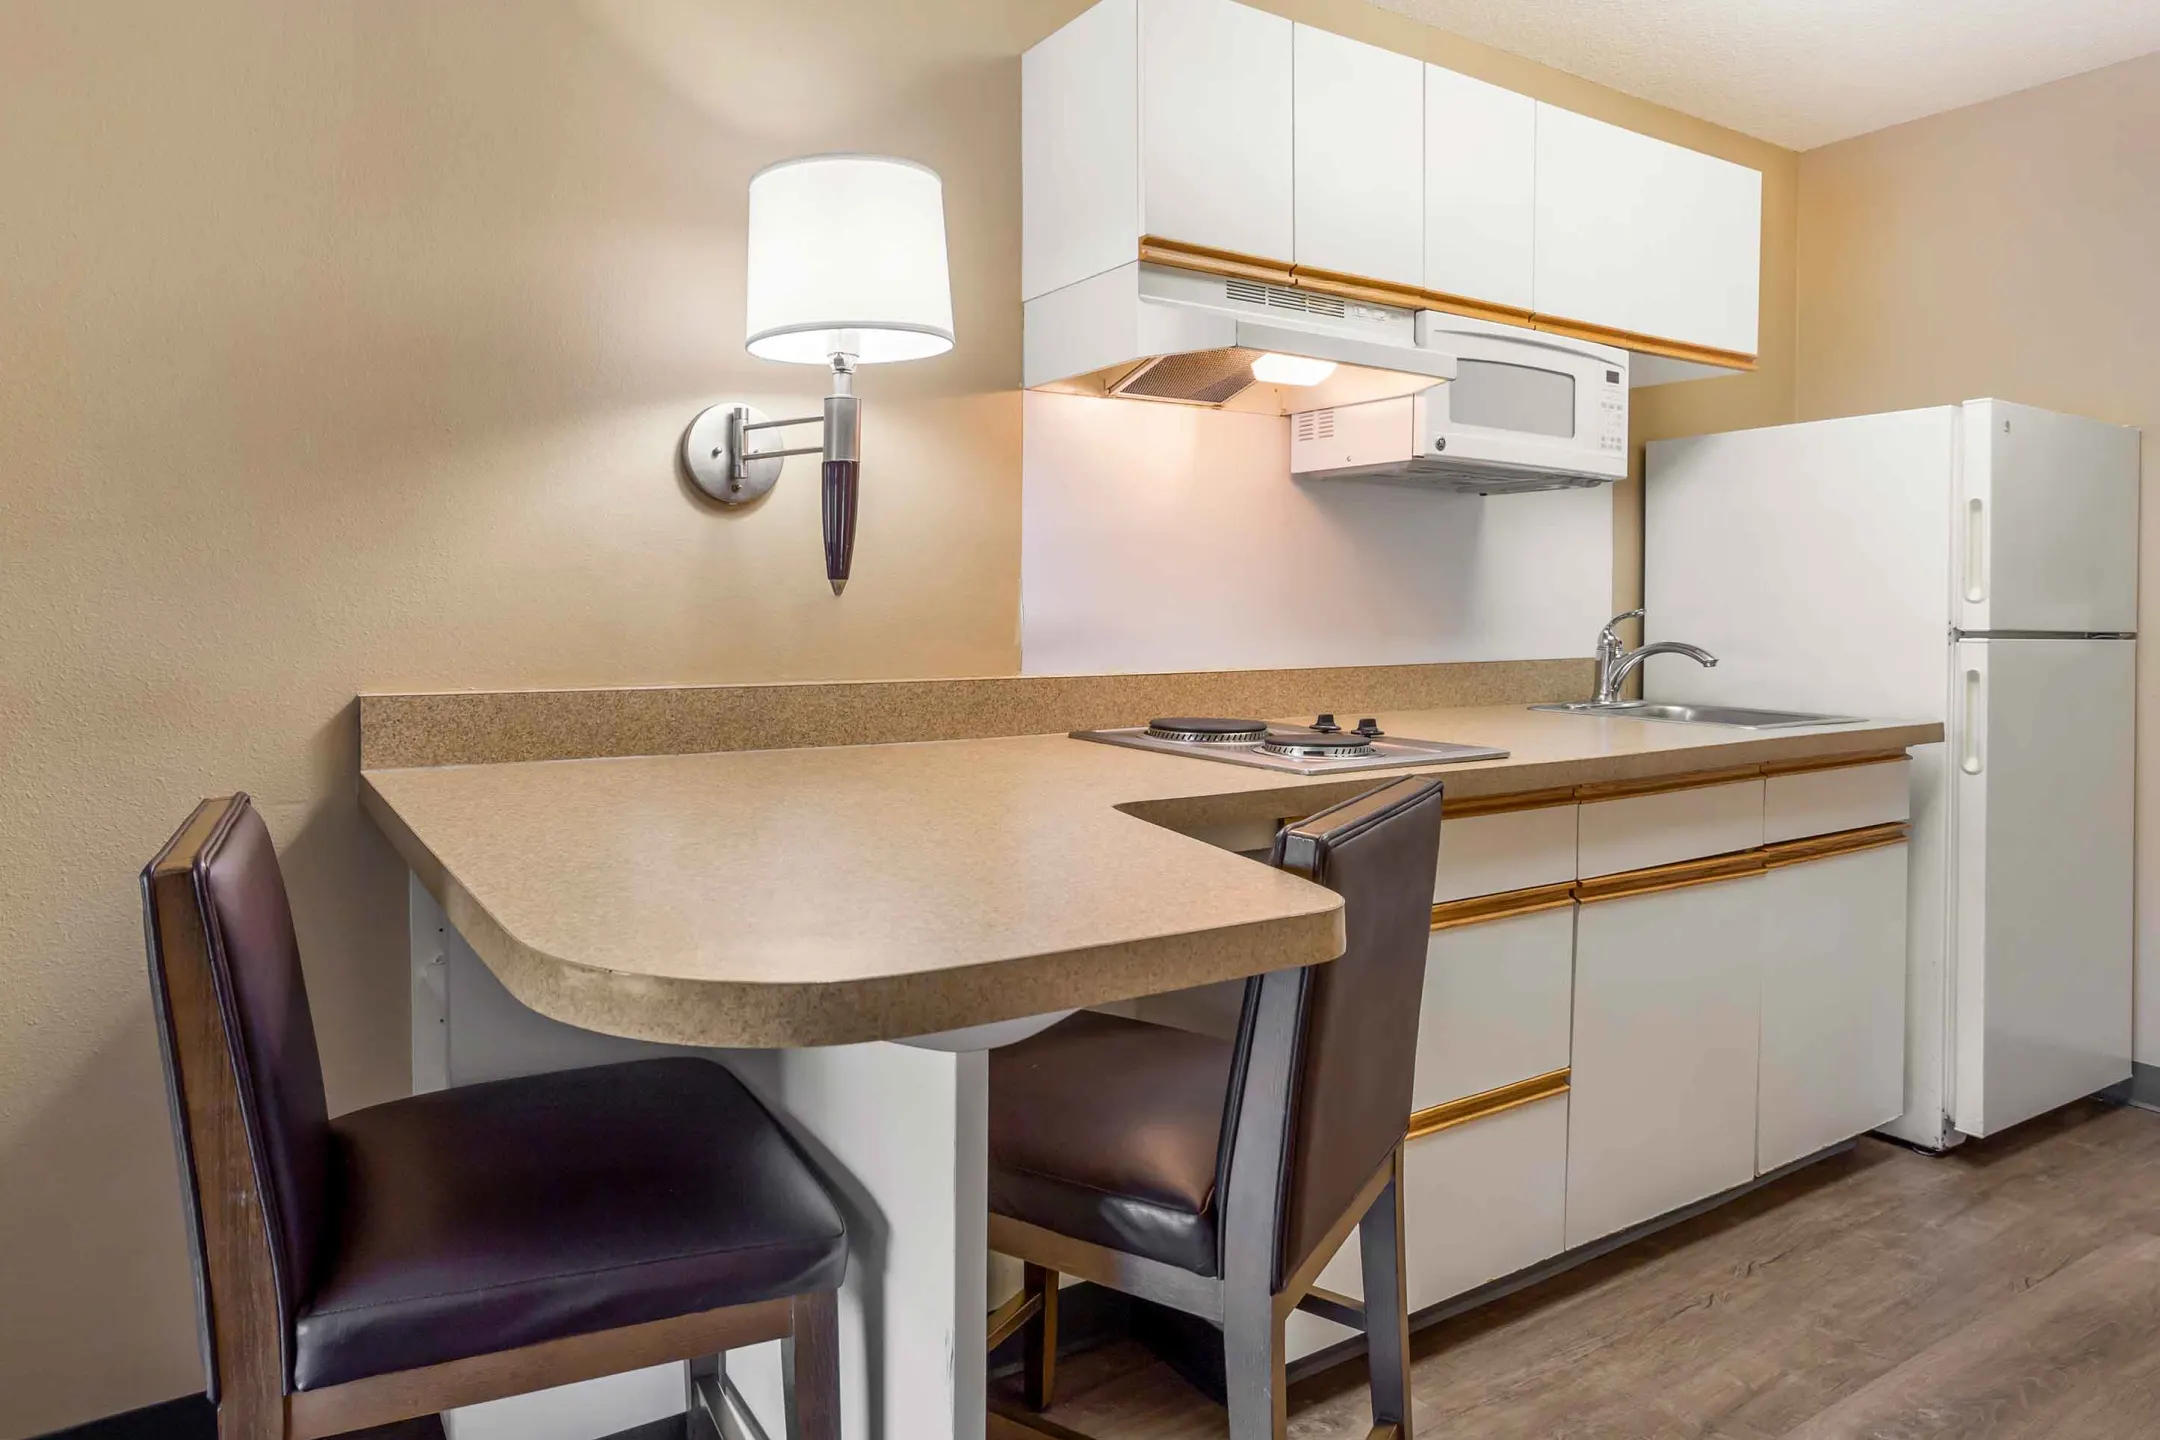 Dining Room - Furnished Studio - Meadowlands - East Rutherford - East Rutherford, NJ